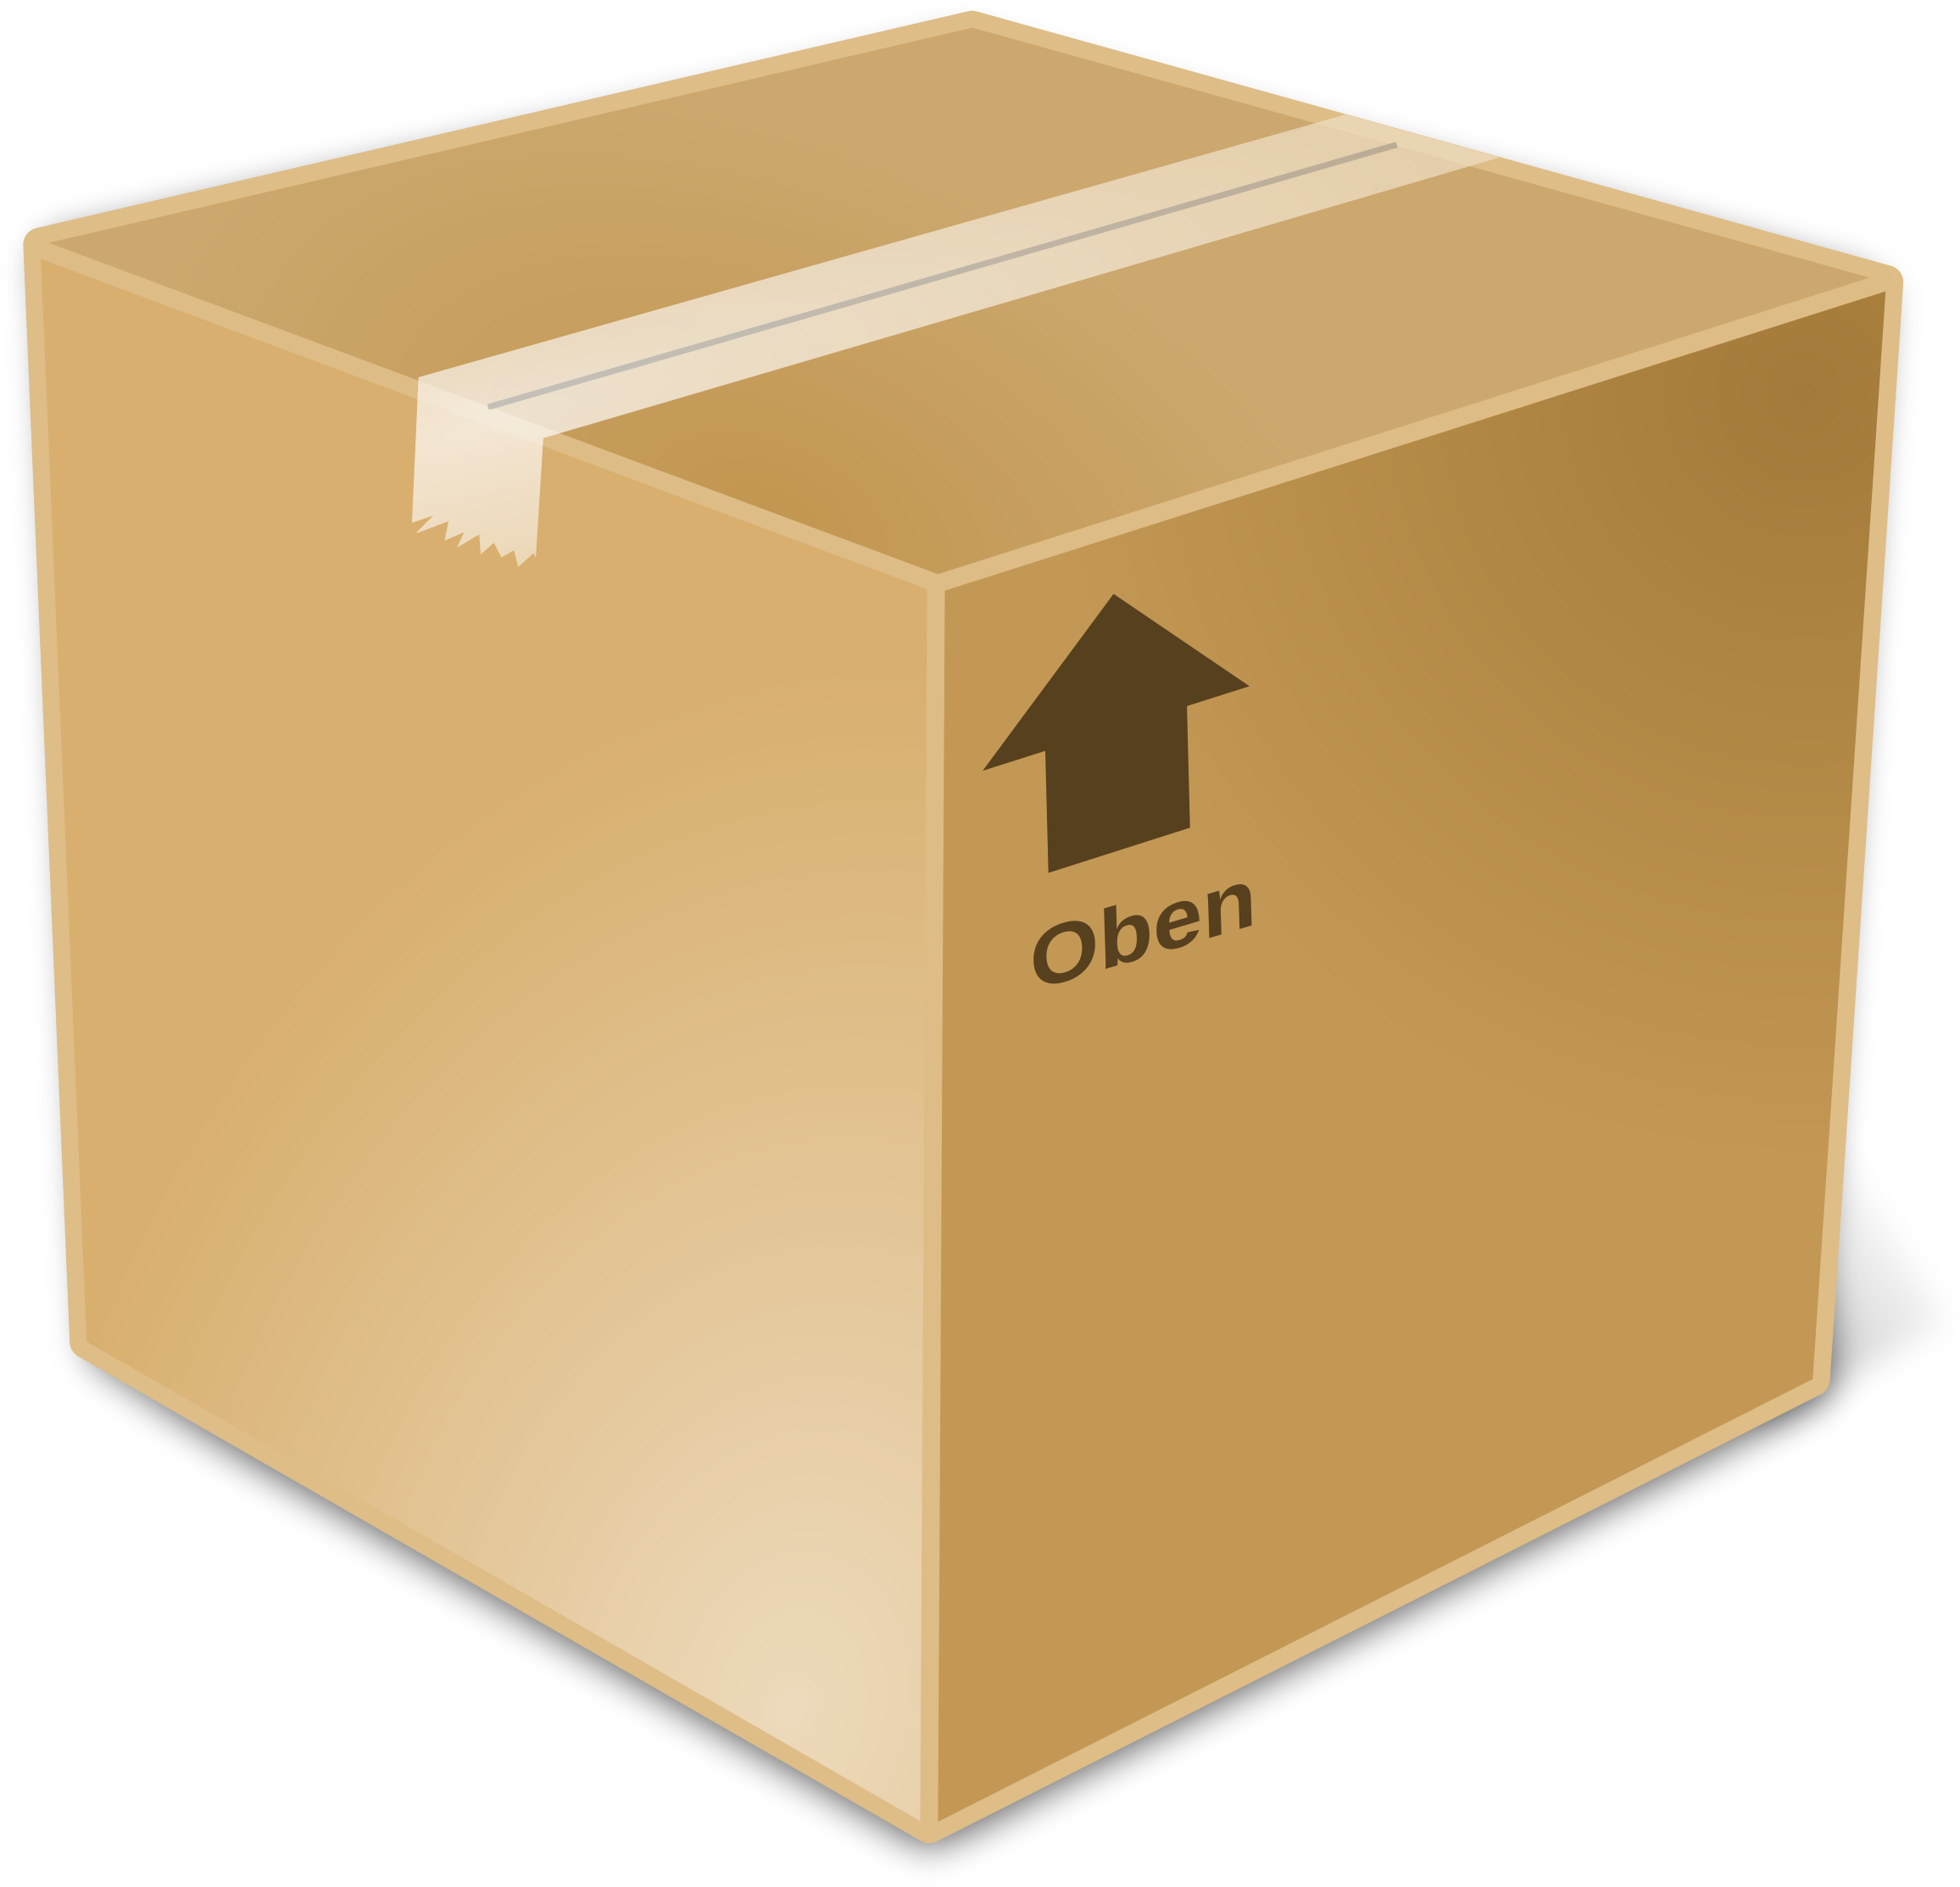 Box clipart packaging.